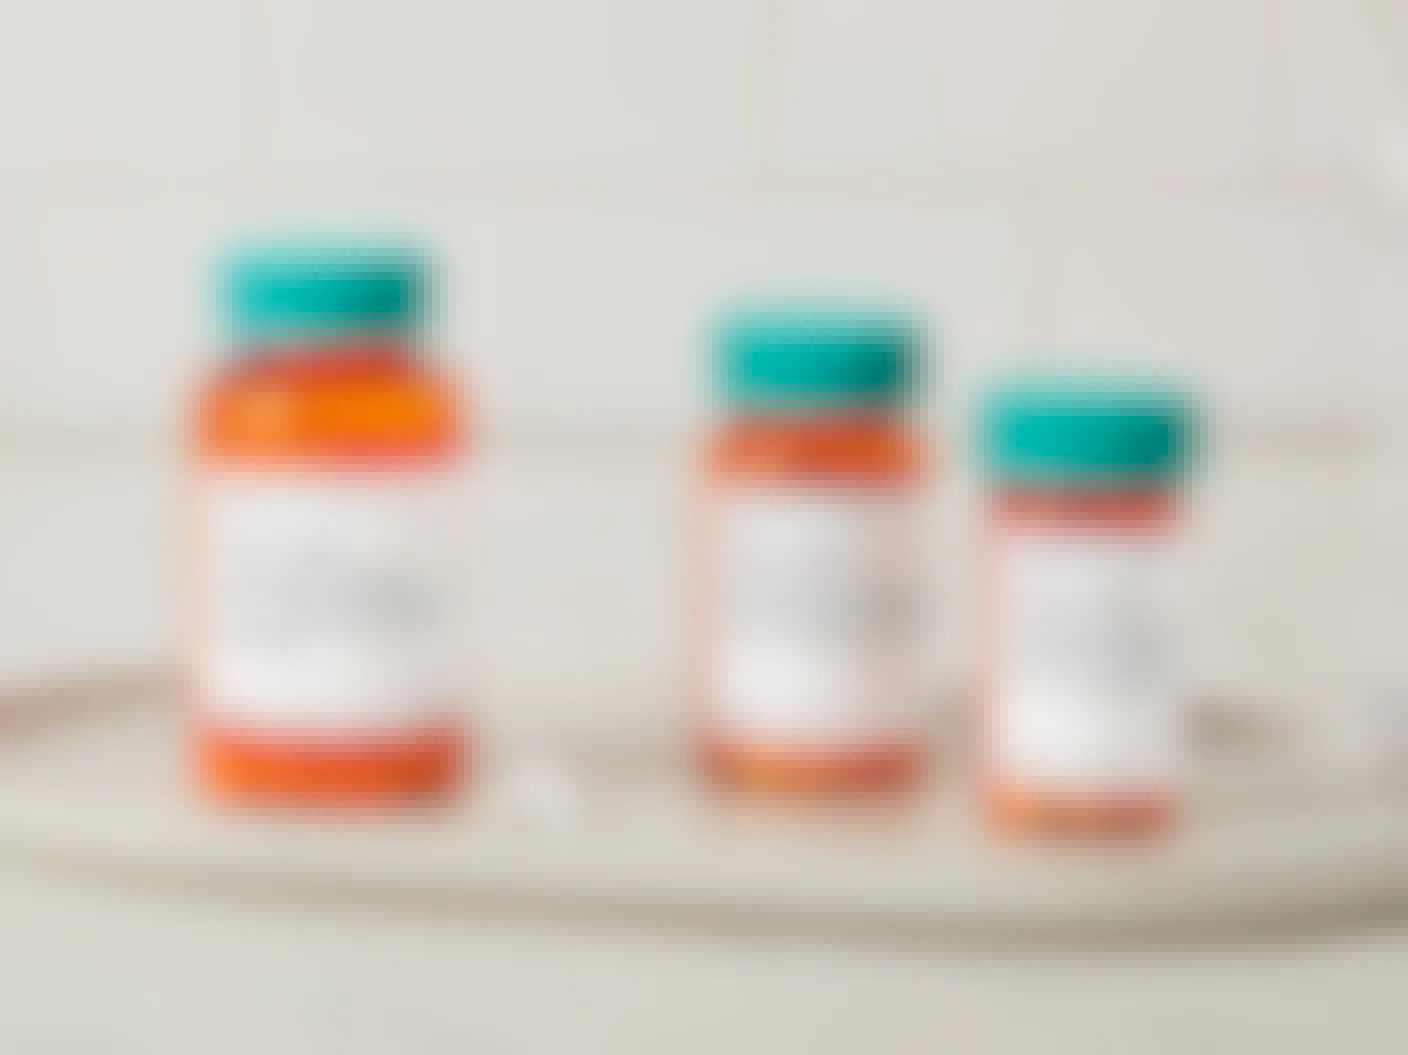 Three Amazon Pharmacy Rx pill bottles sitting on a tray on a bathroom counter.